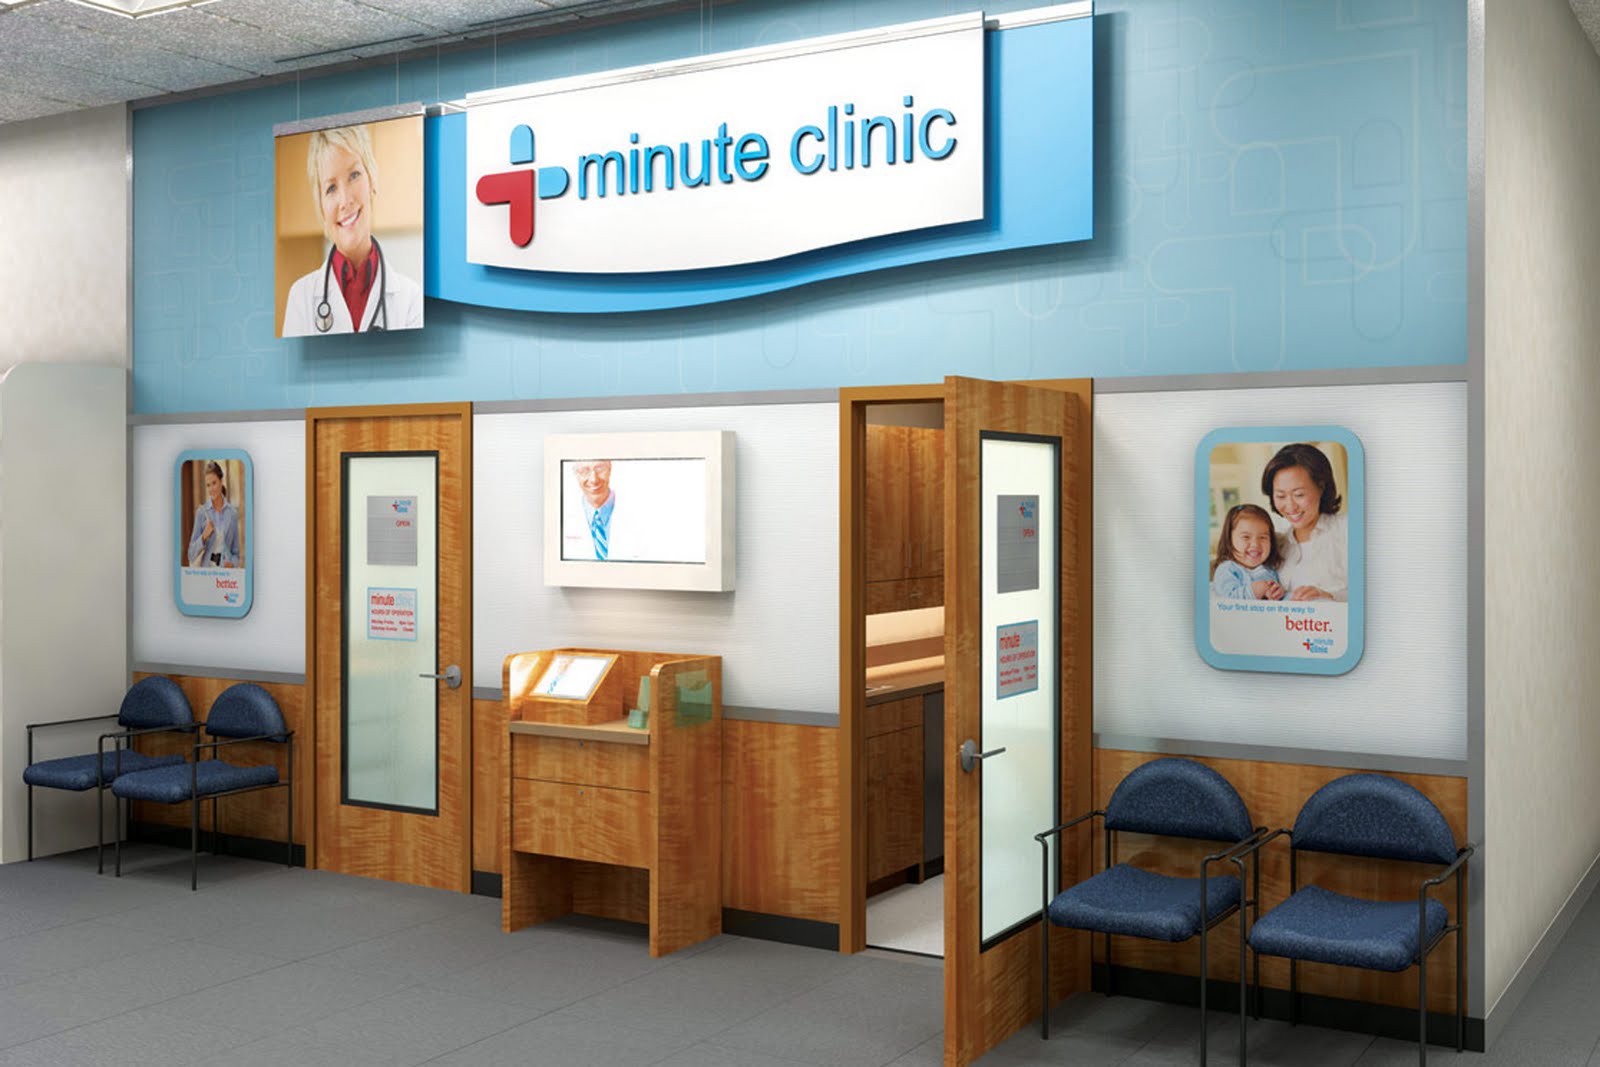 CARPE DIEM: Boom Industry: There Are Now 1,300 Retail Clinics